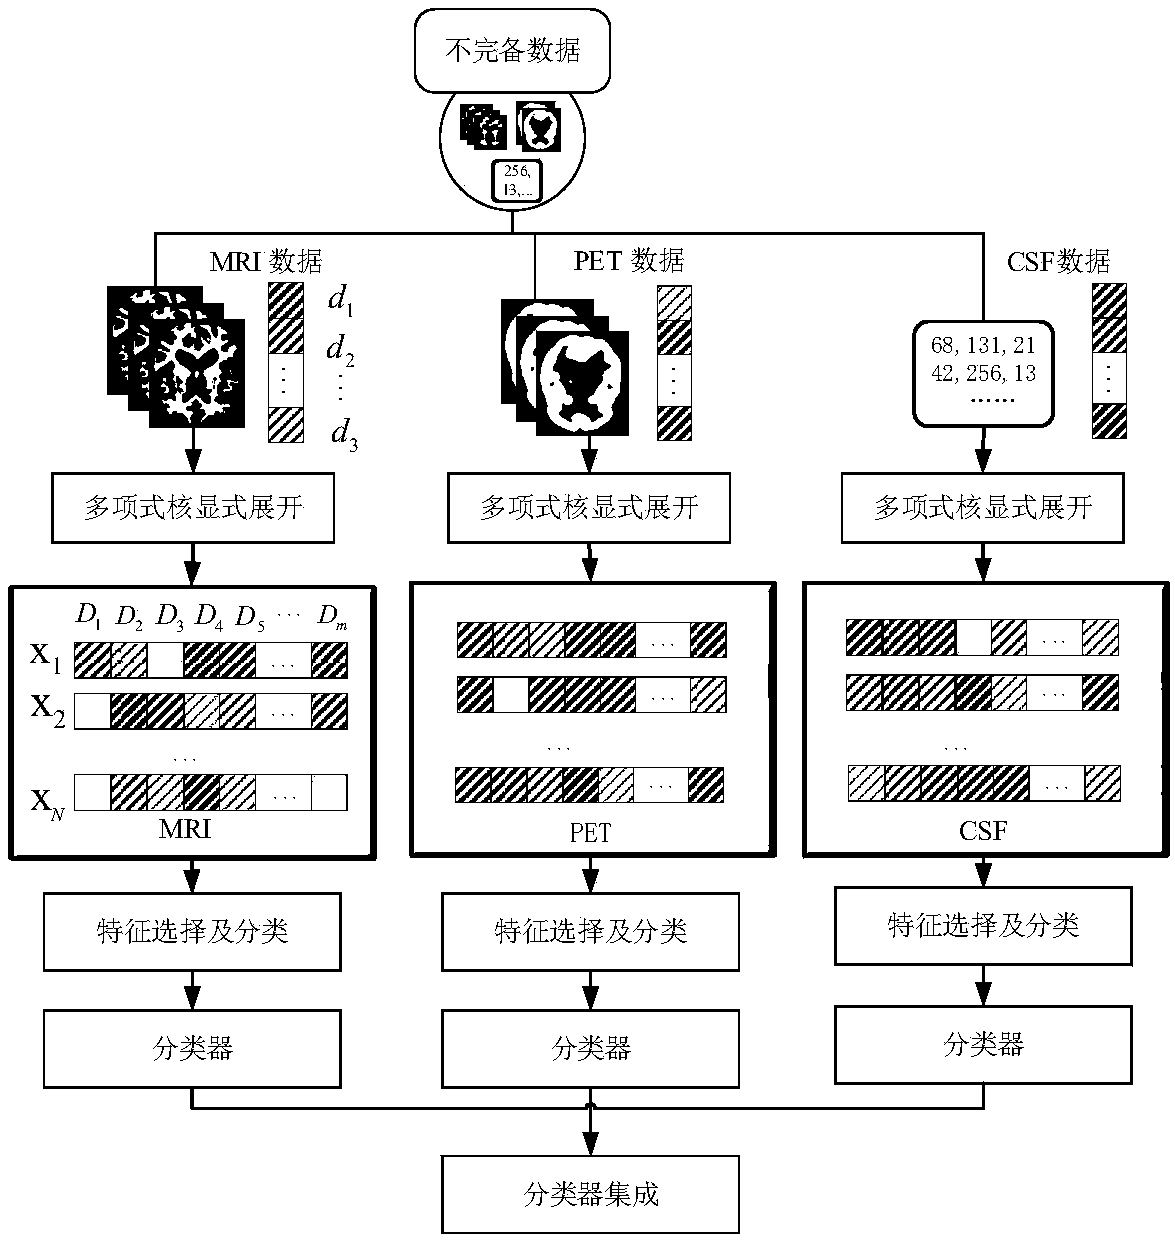 Multi-modal data classification method based on feature selection